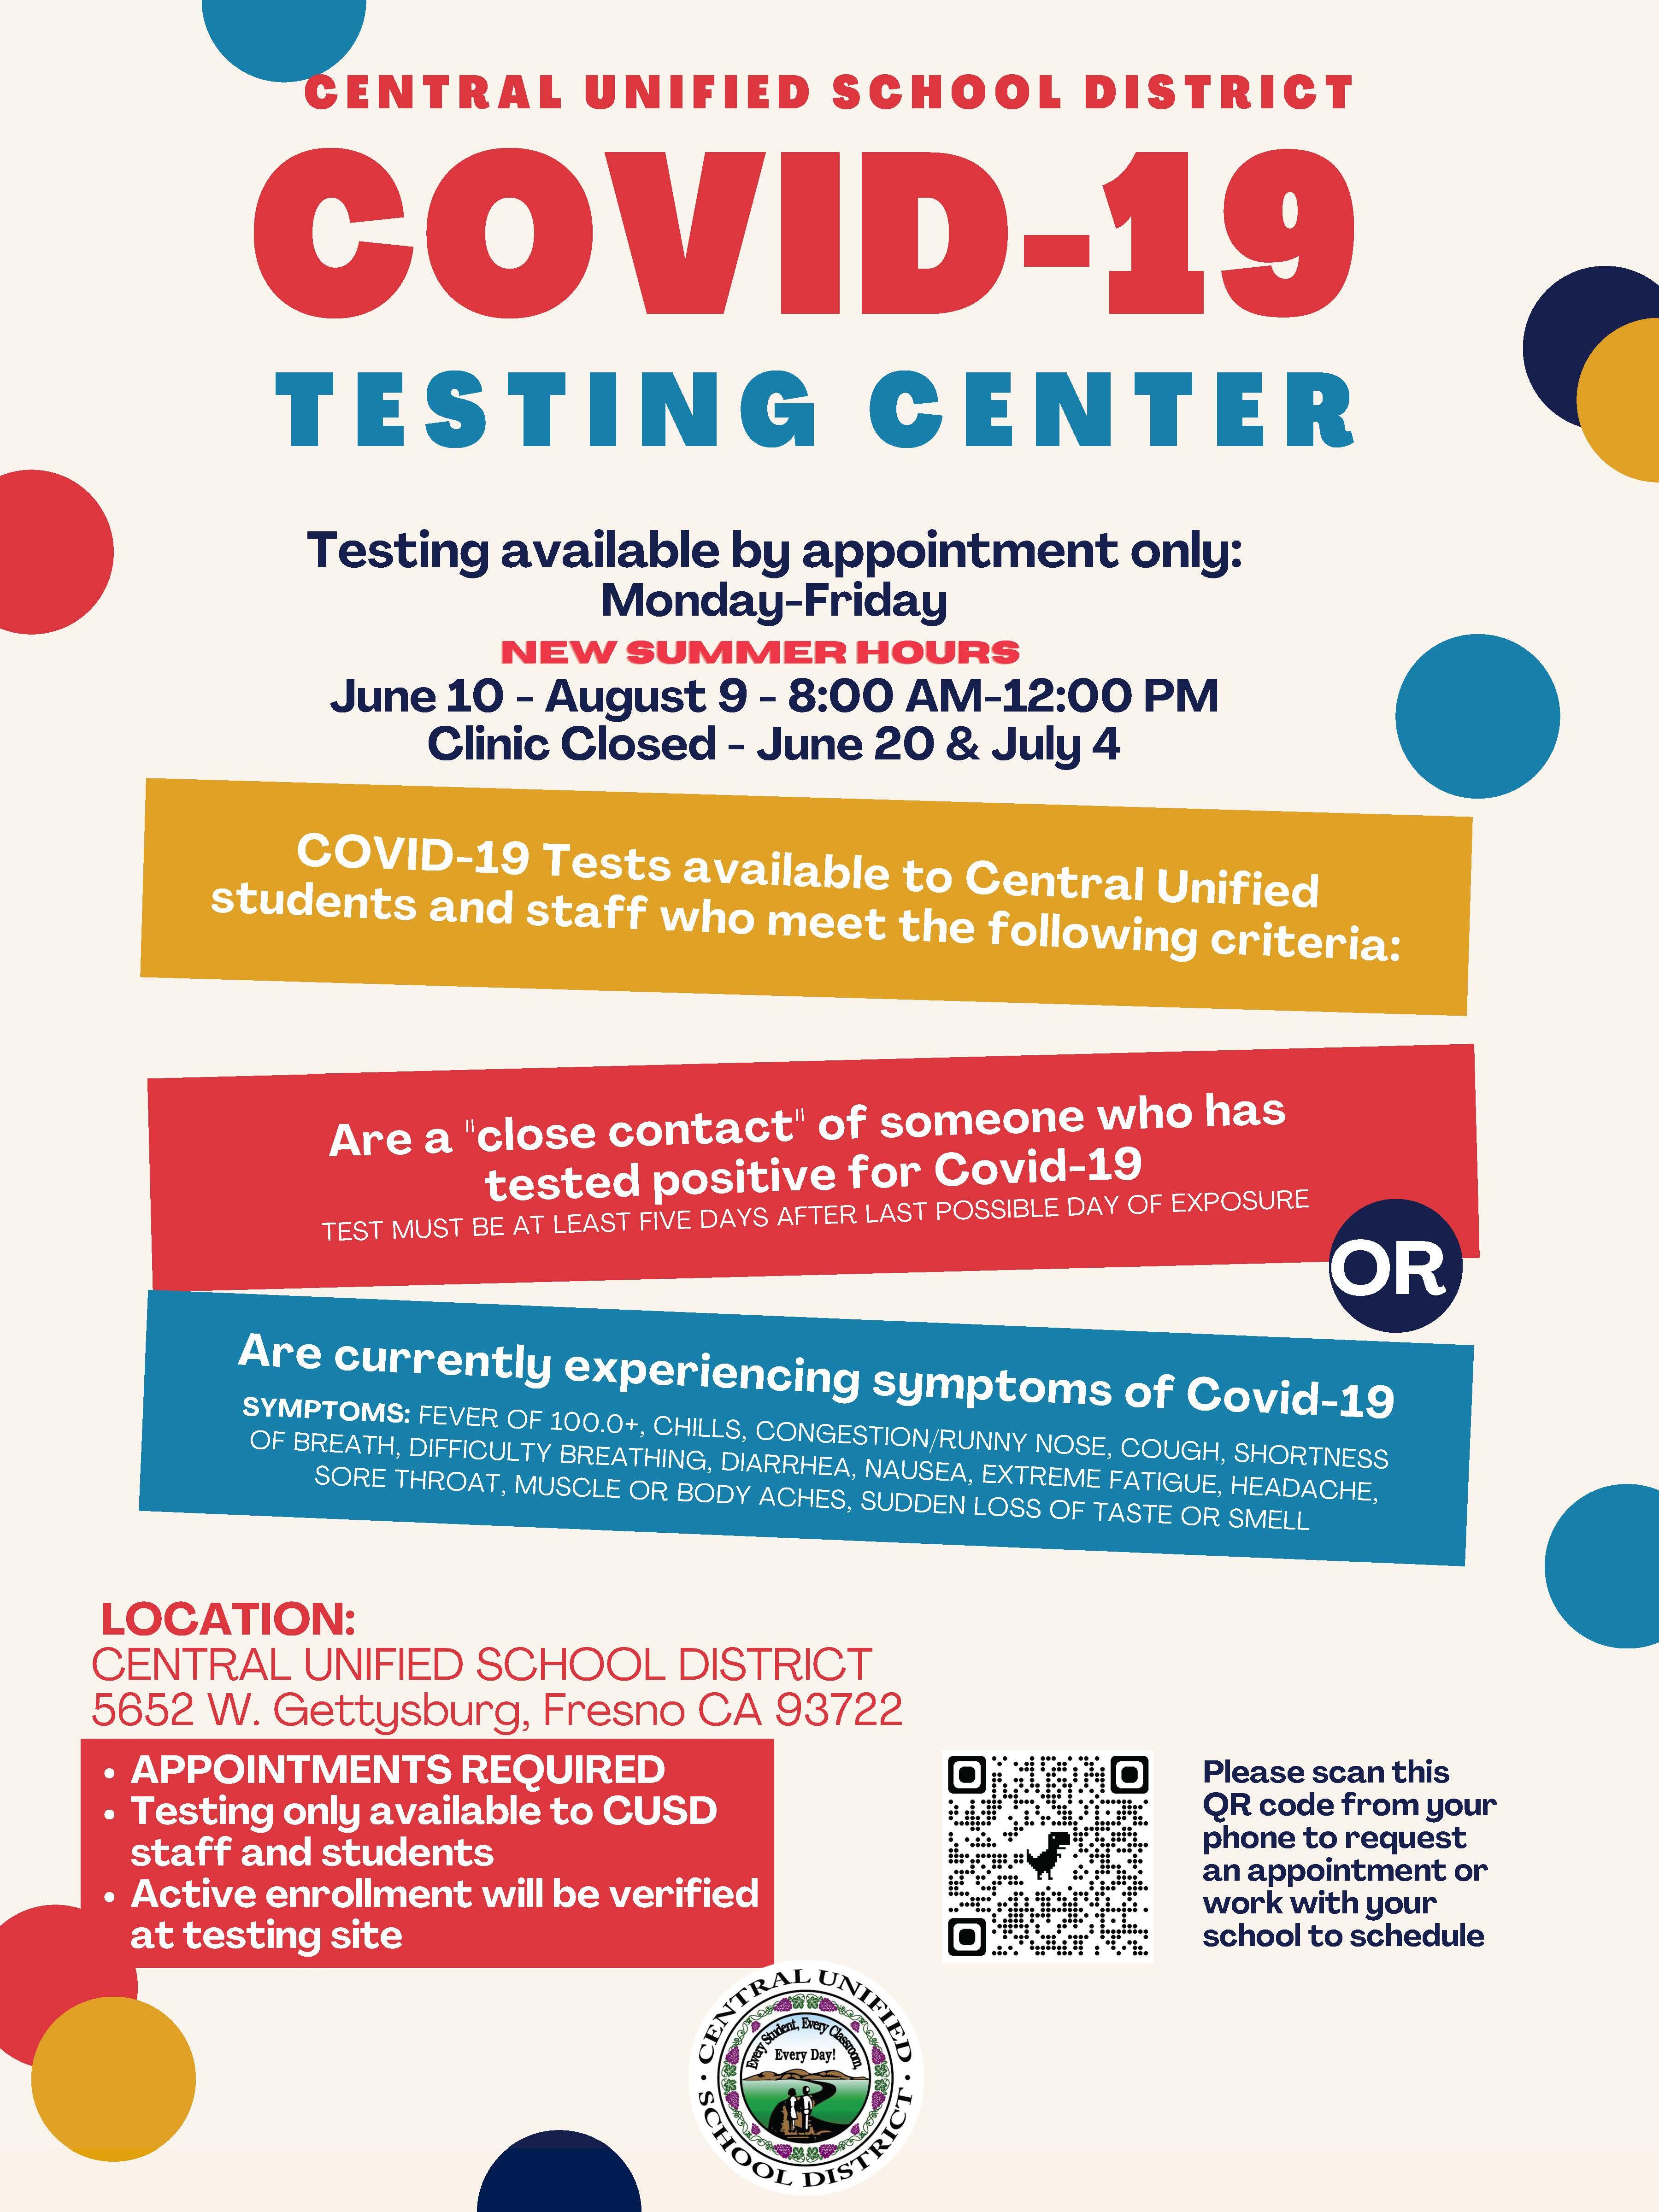 Covid-19 testing center- summer hours